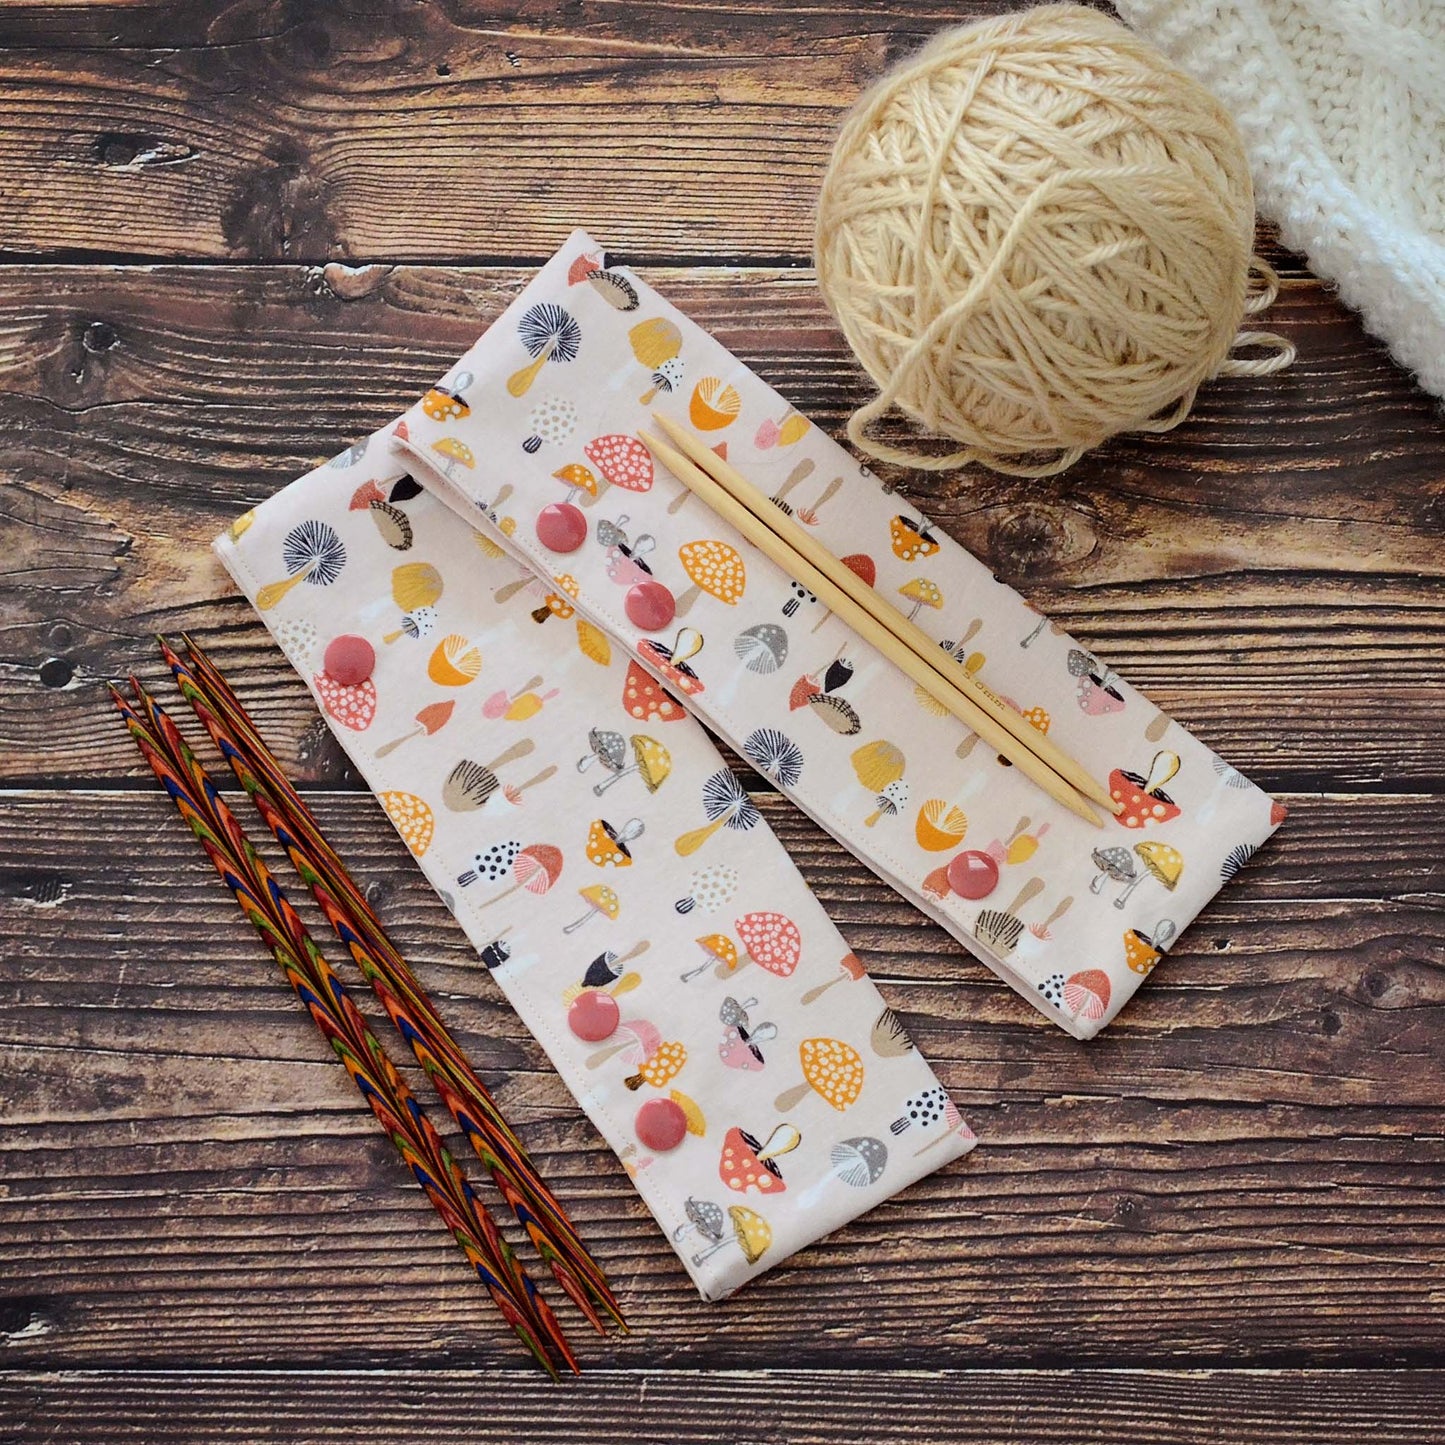 Mushroom themed dpn cozy with snaps for varying lengths of double pointed needles.  Made in Canada by Yellow Petal Handmade.